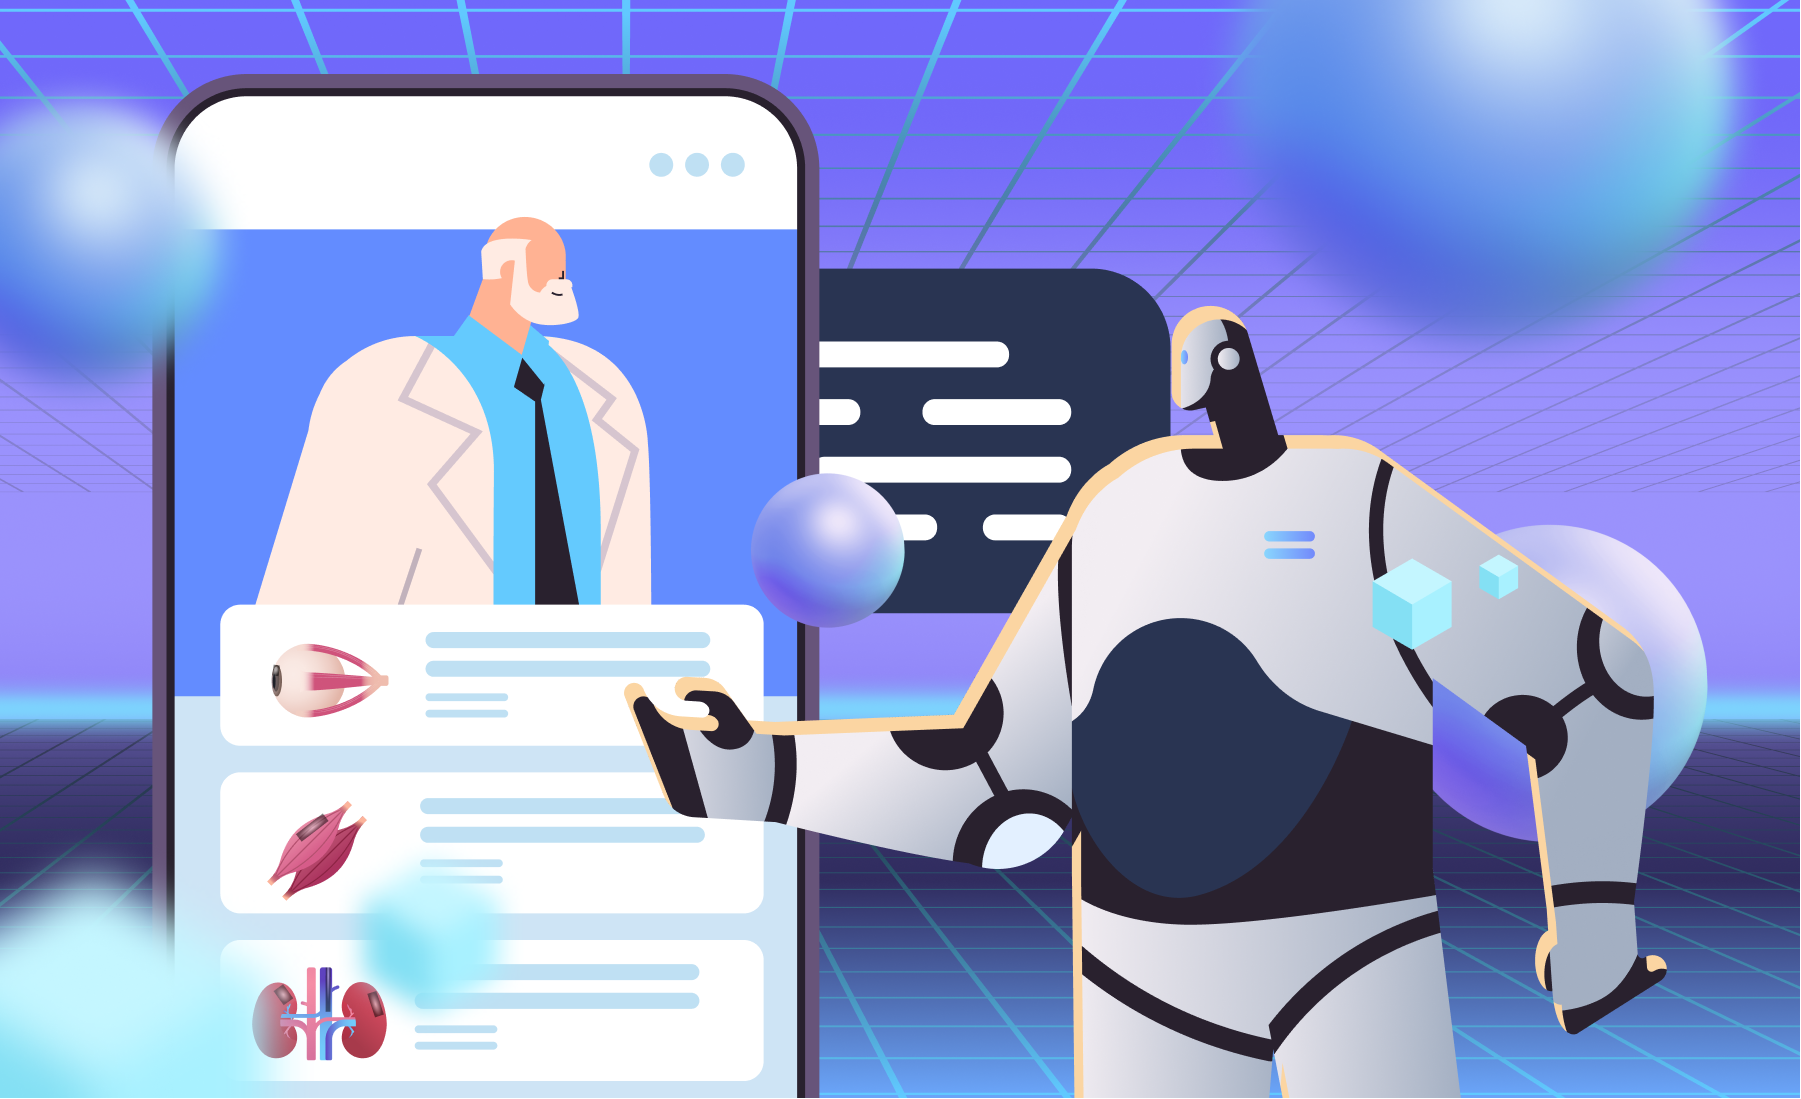 How do backend AI integrations in healthcare improve electronic health records: the doctor shakes hands with his robot assistant